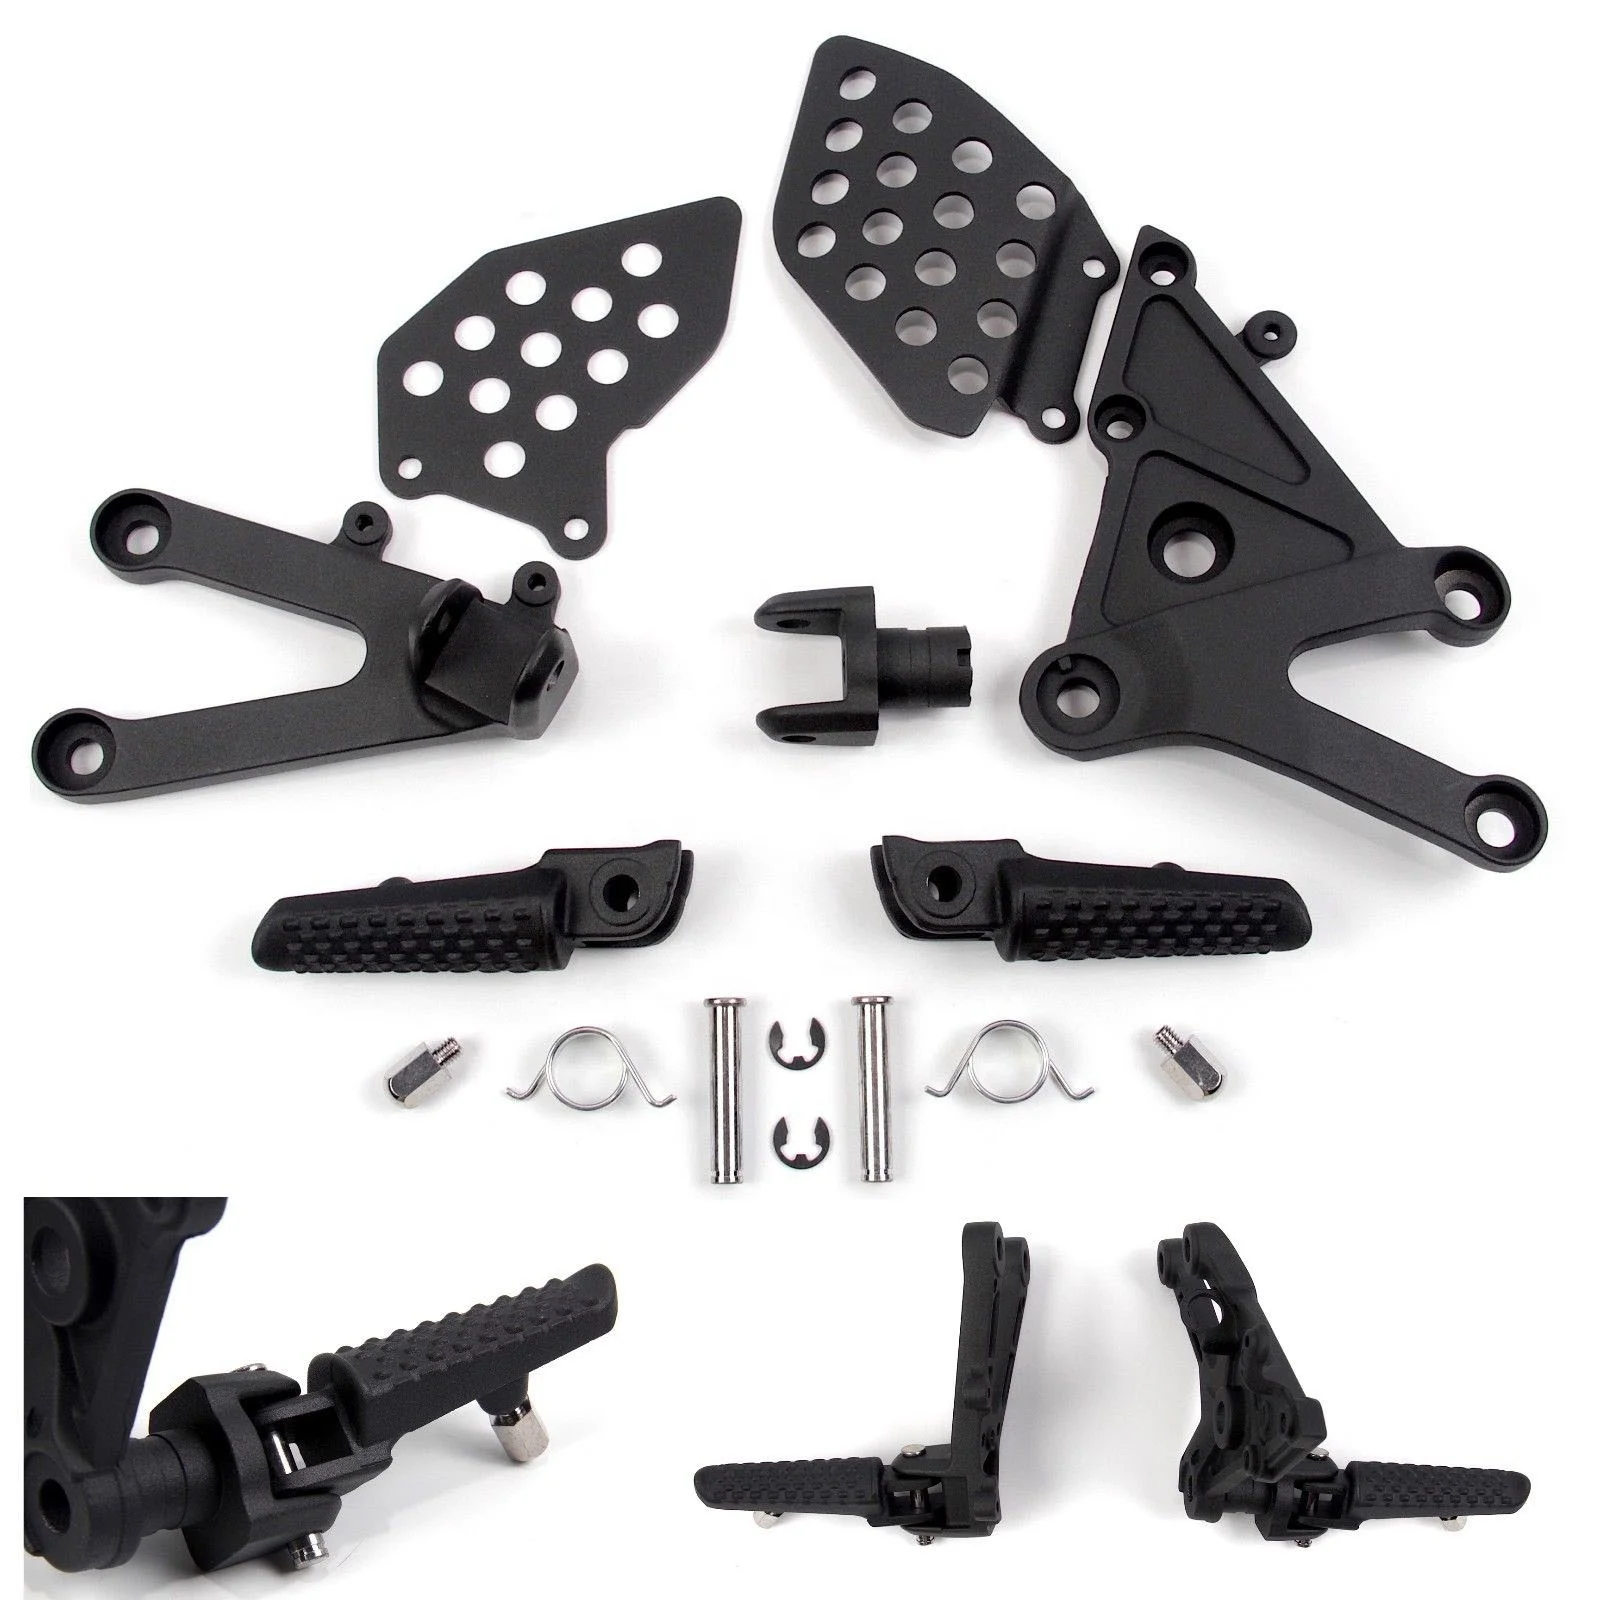 

Motorcycle Front Foot Pegs Brackets Footrests Footpeg Foot Rests For Honda CBR600RR 2003-2006 Black Silver, As photo show